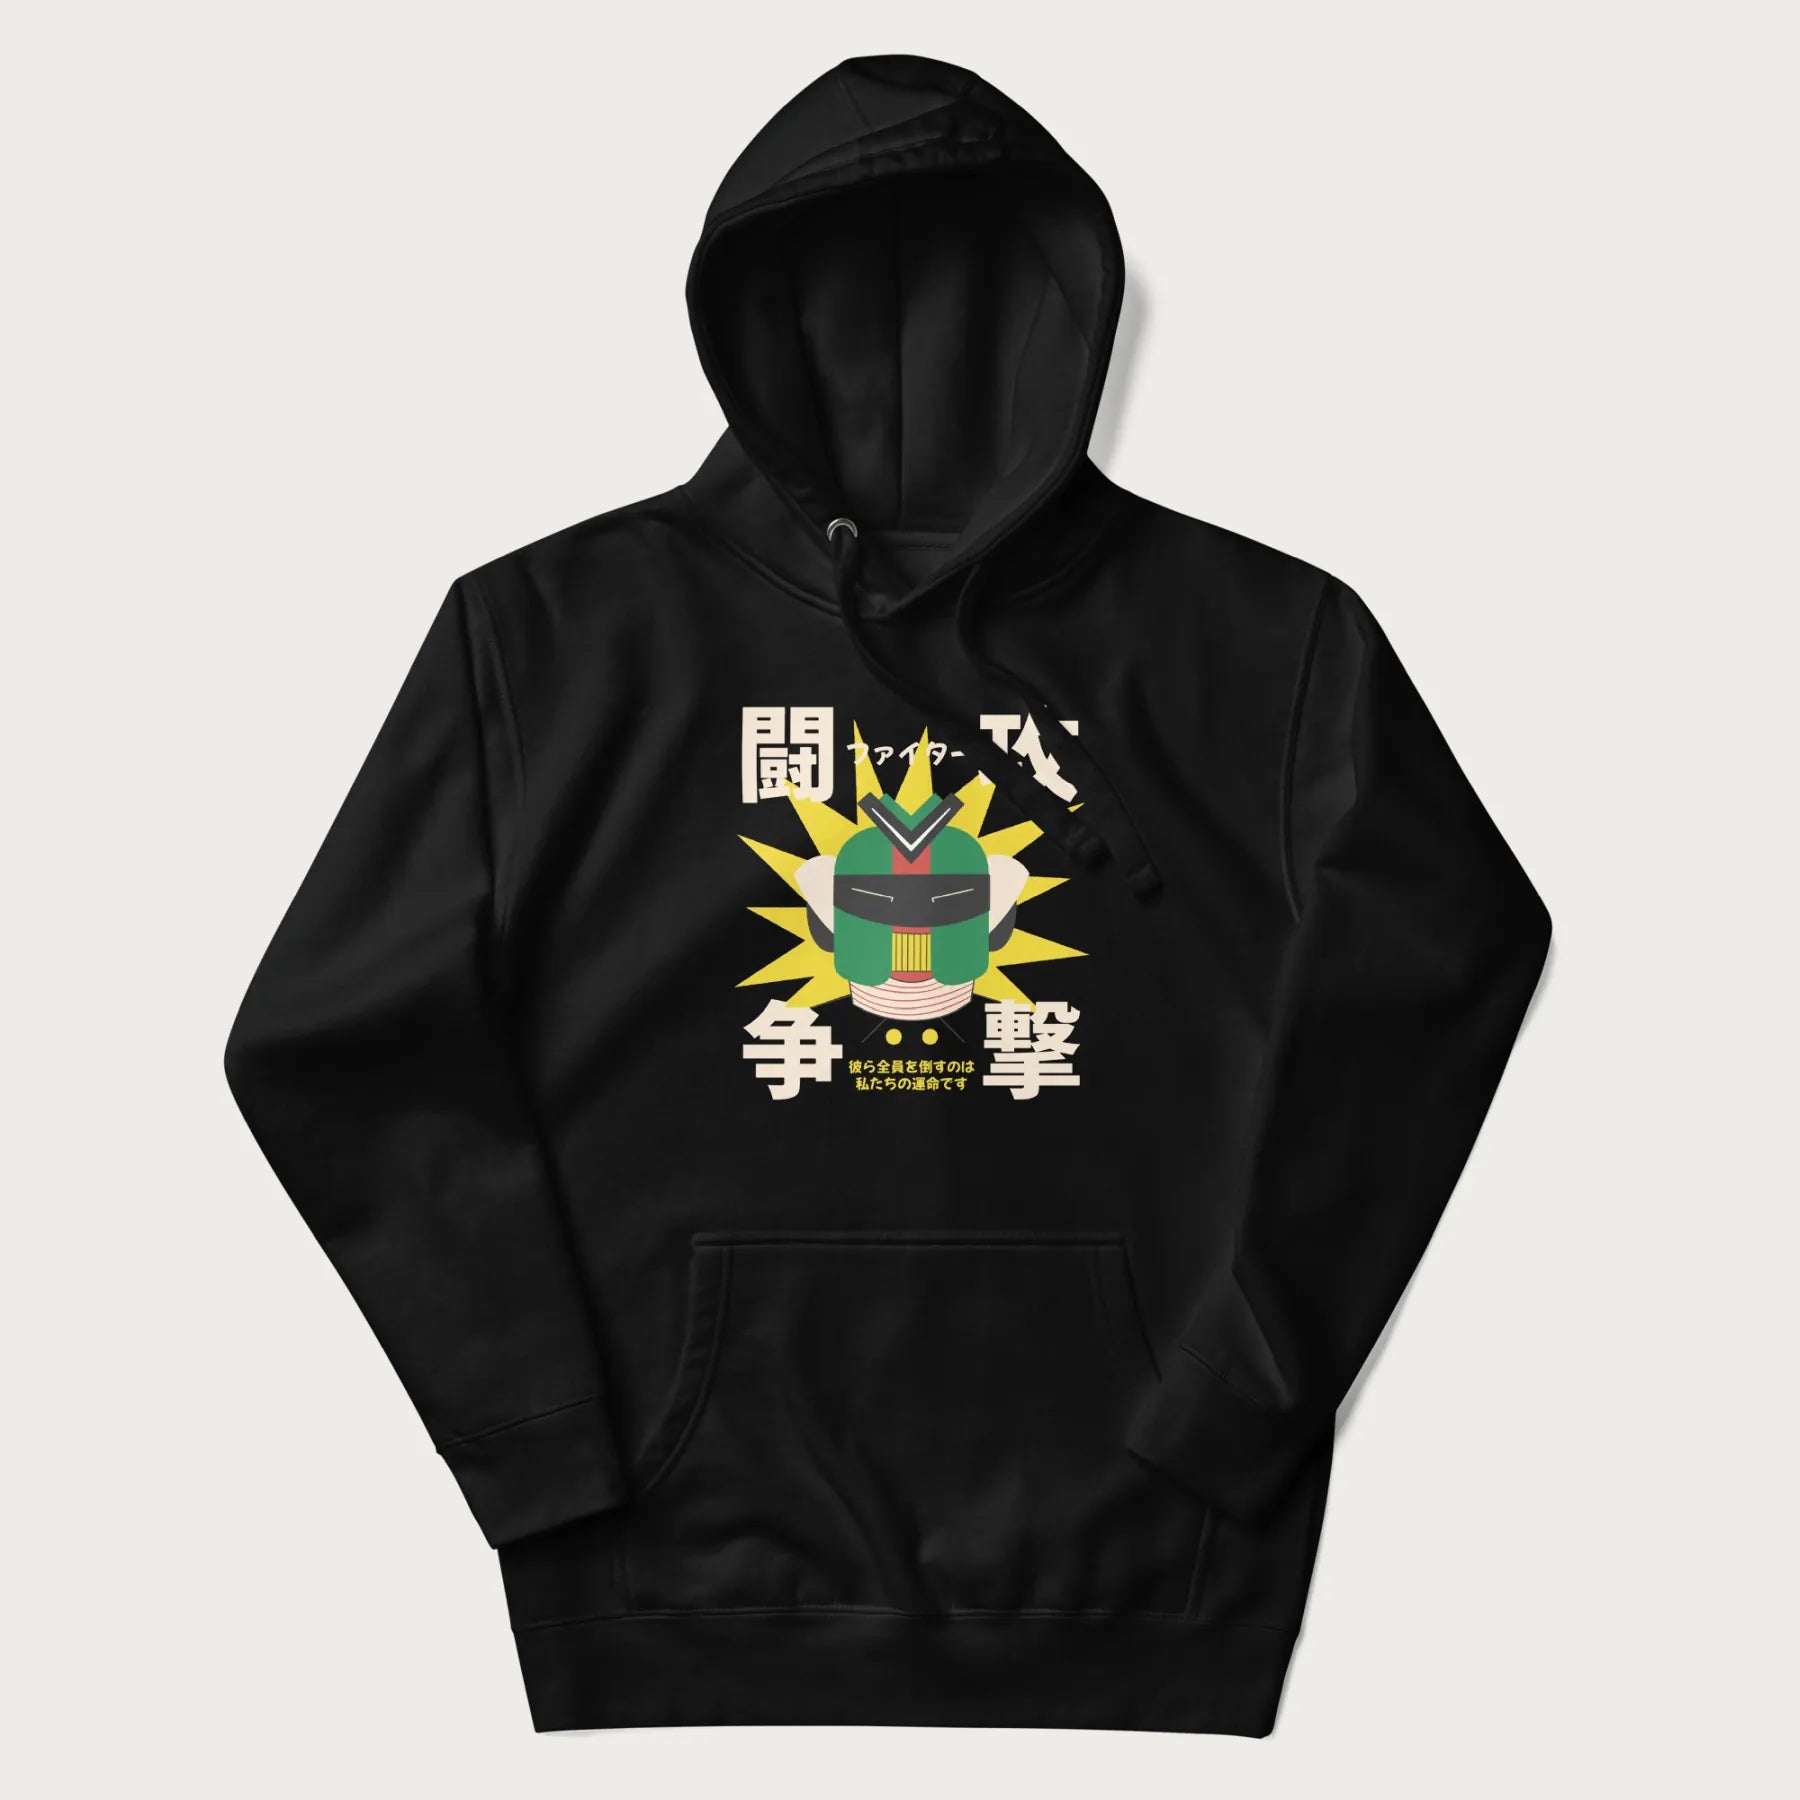 Black hoodie with retro graphic of a mecha warrior and Japanese text for "Fight," "Attack," "Conflict," and "Destiny to defeat them all".